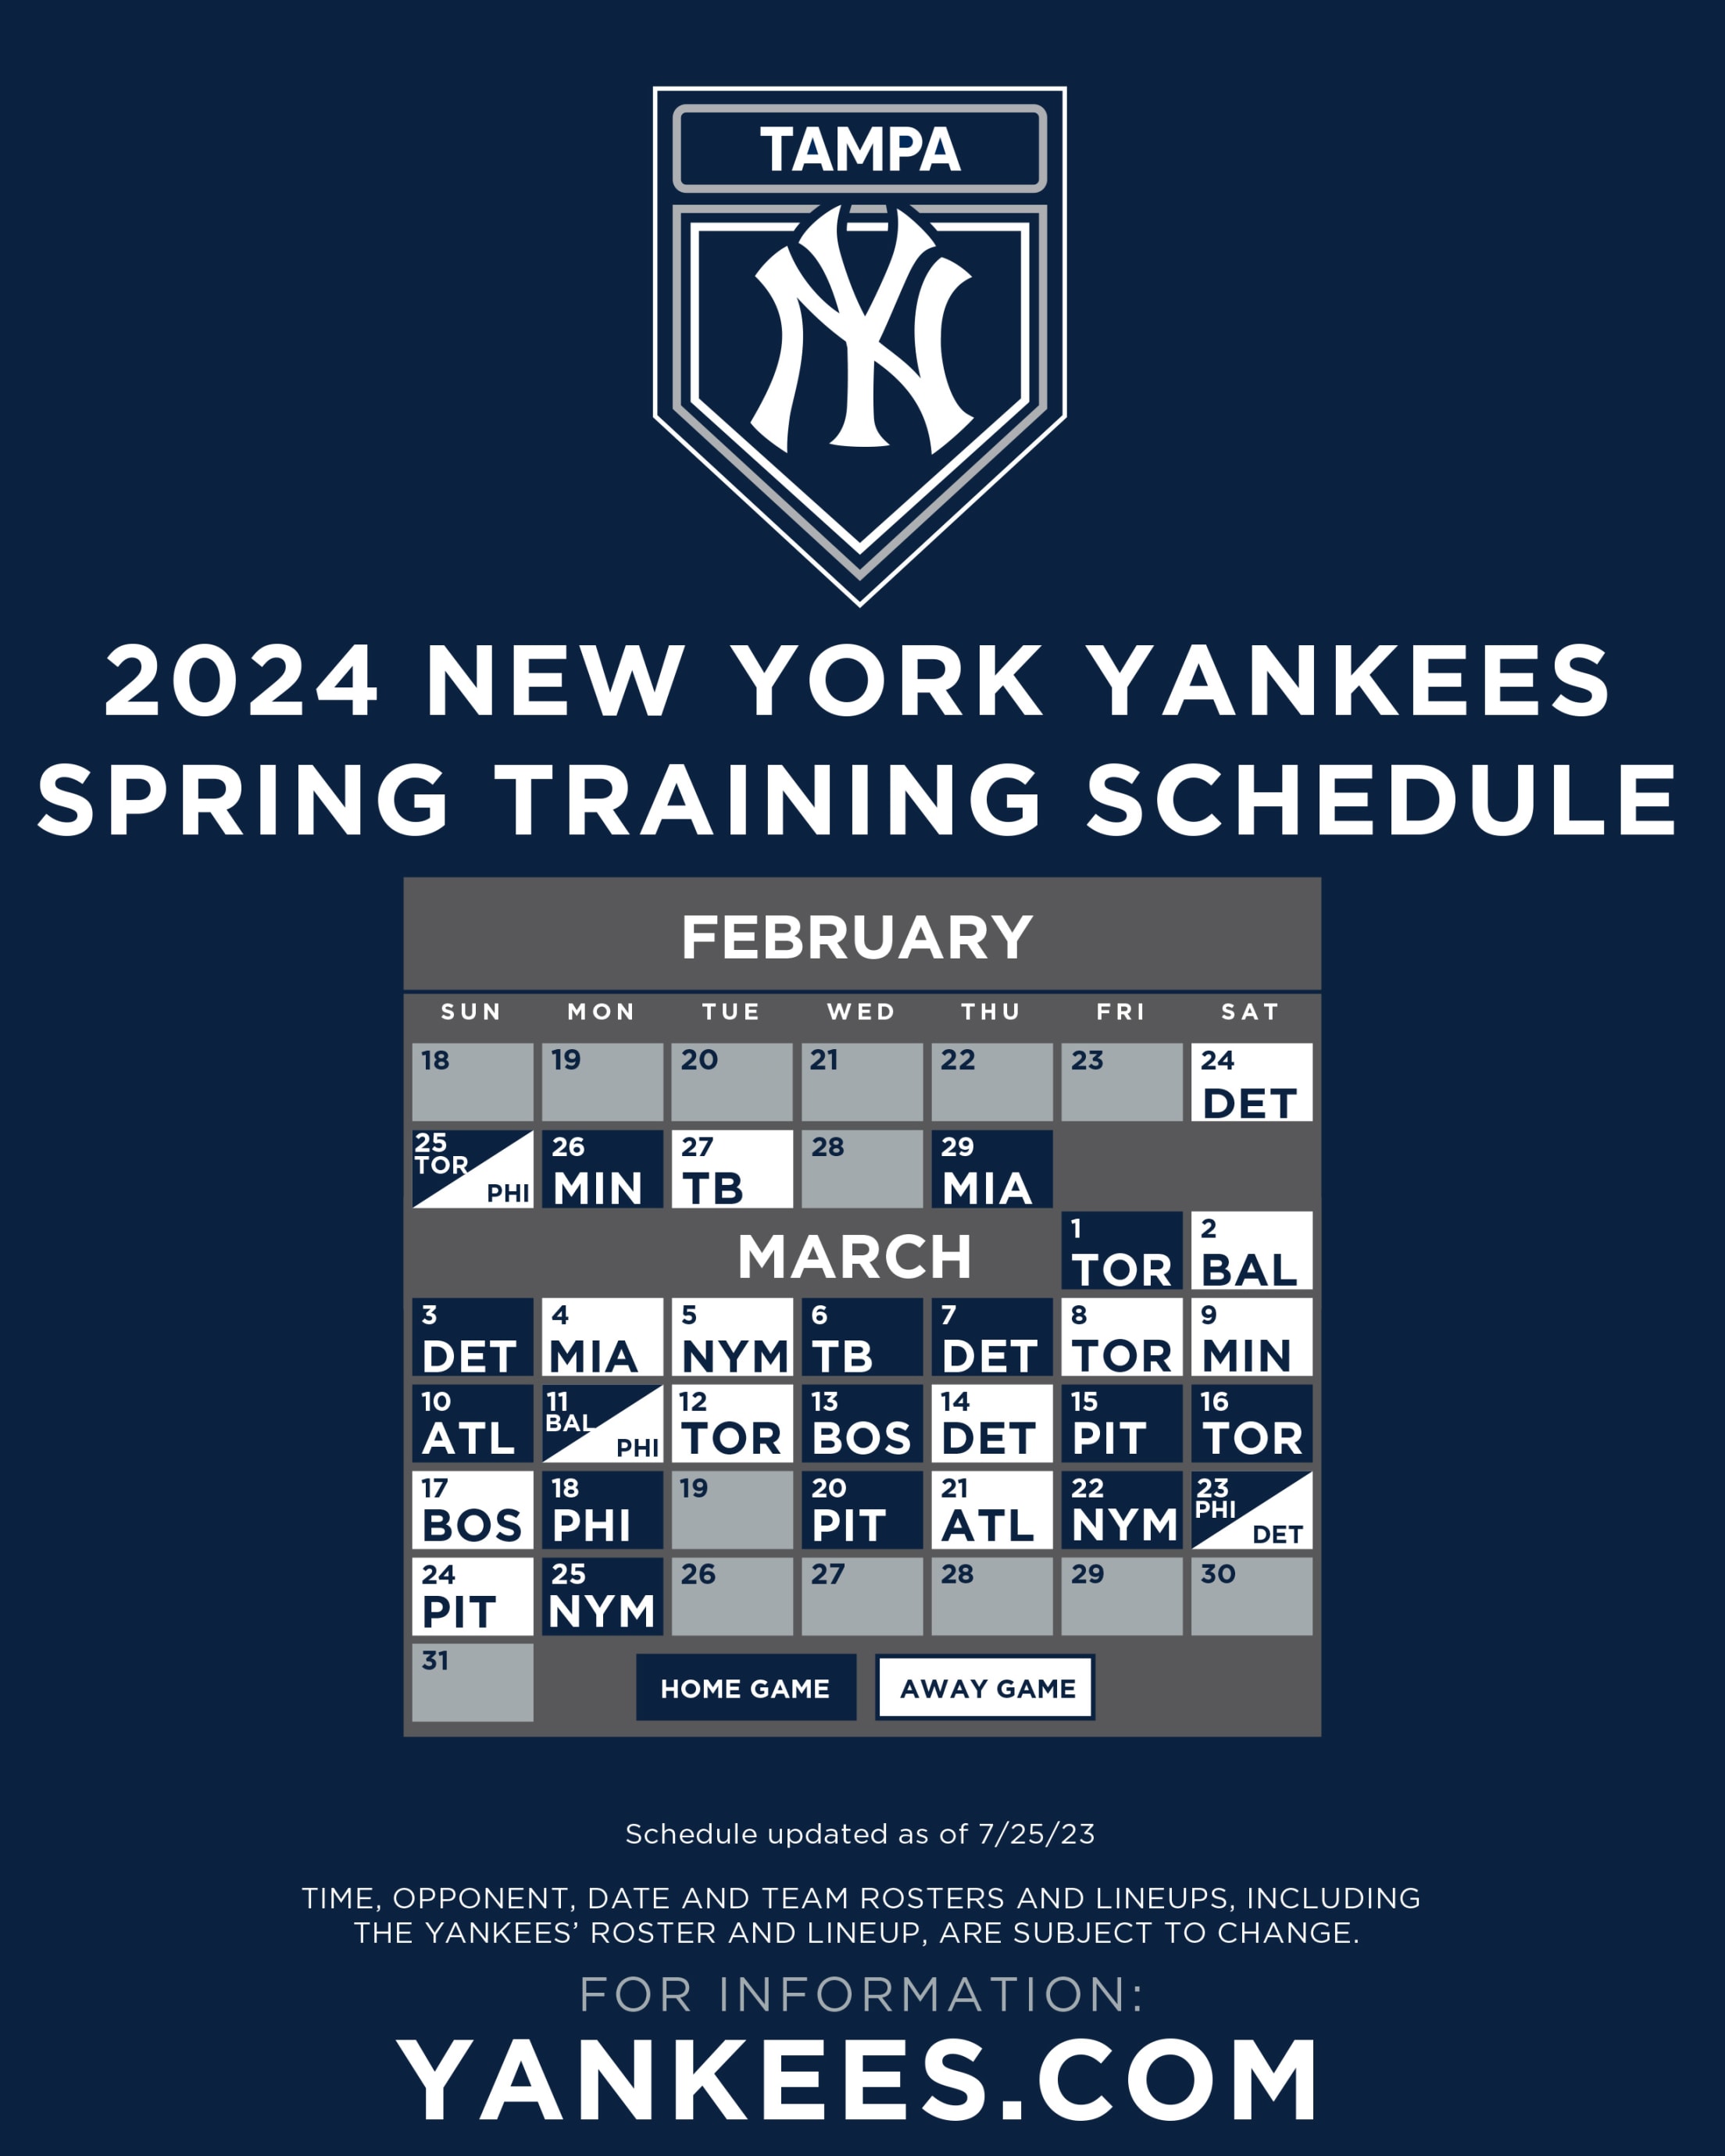 MLB releases 2018 Spring Training schedule